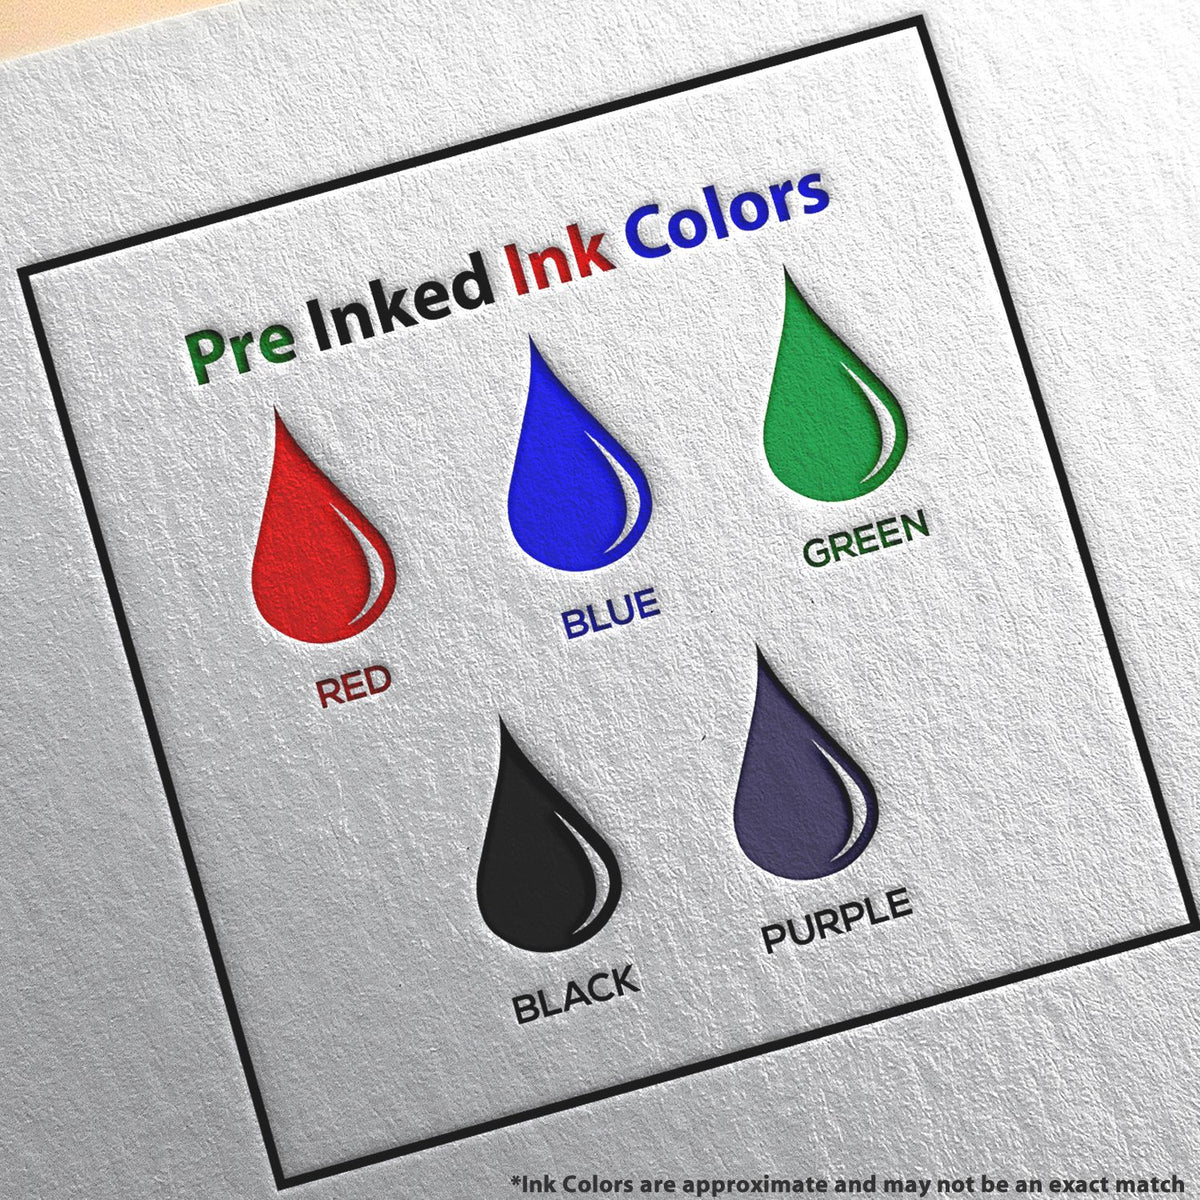 A picture showing the different ink colors or hues available for the Slim Pre-Inked Colorado Architect Seal Stamp product.